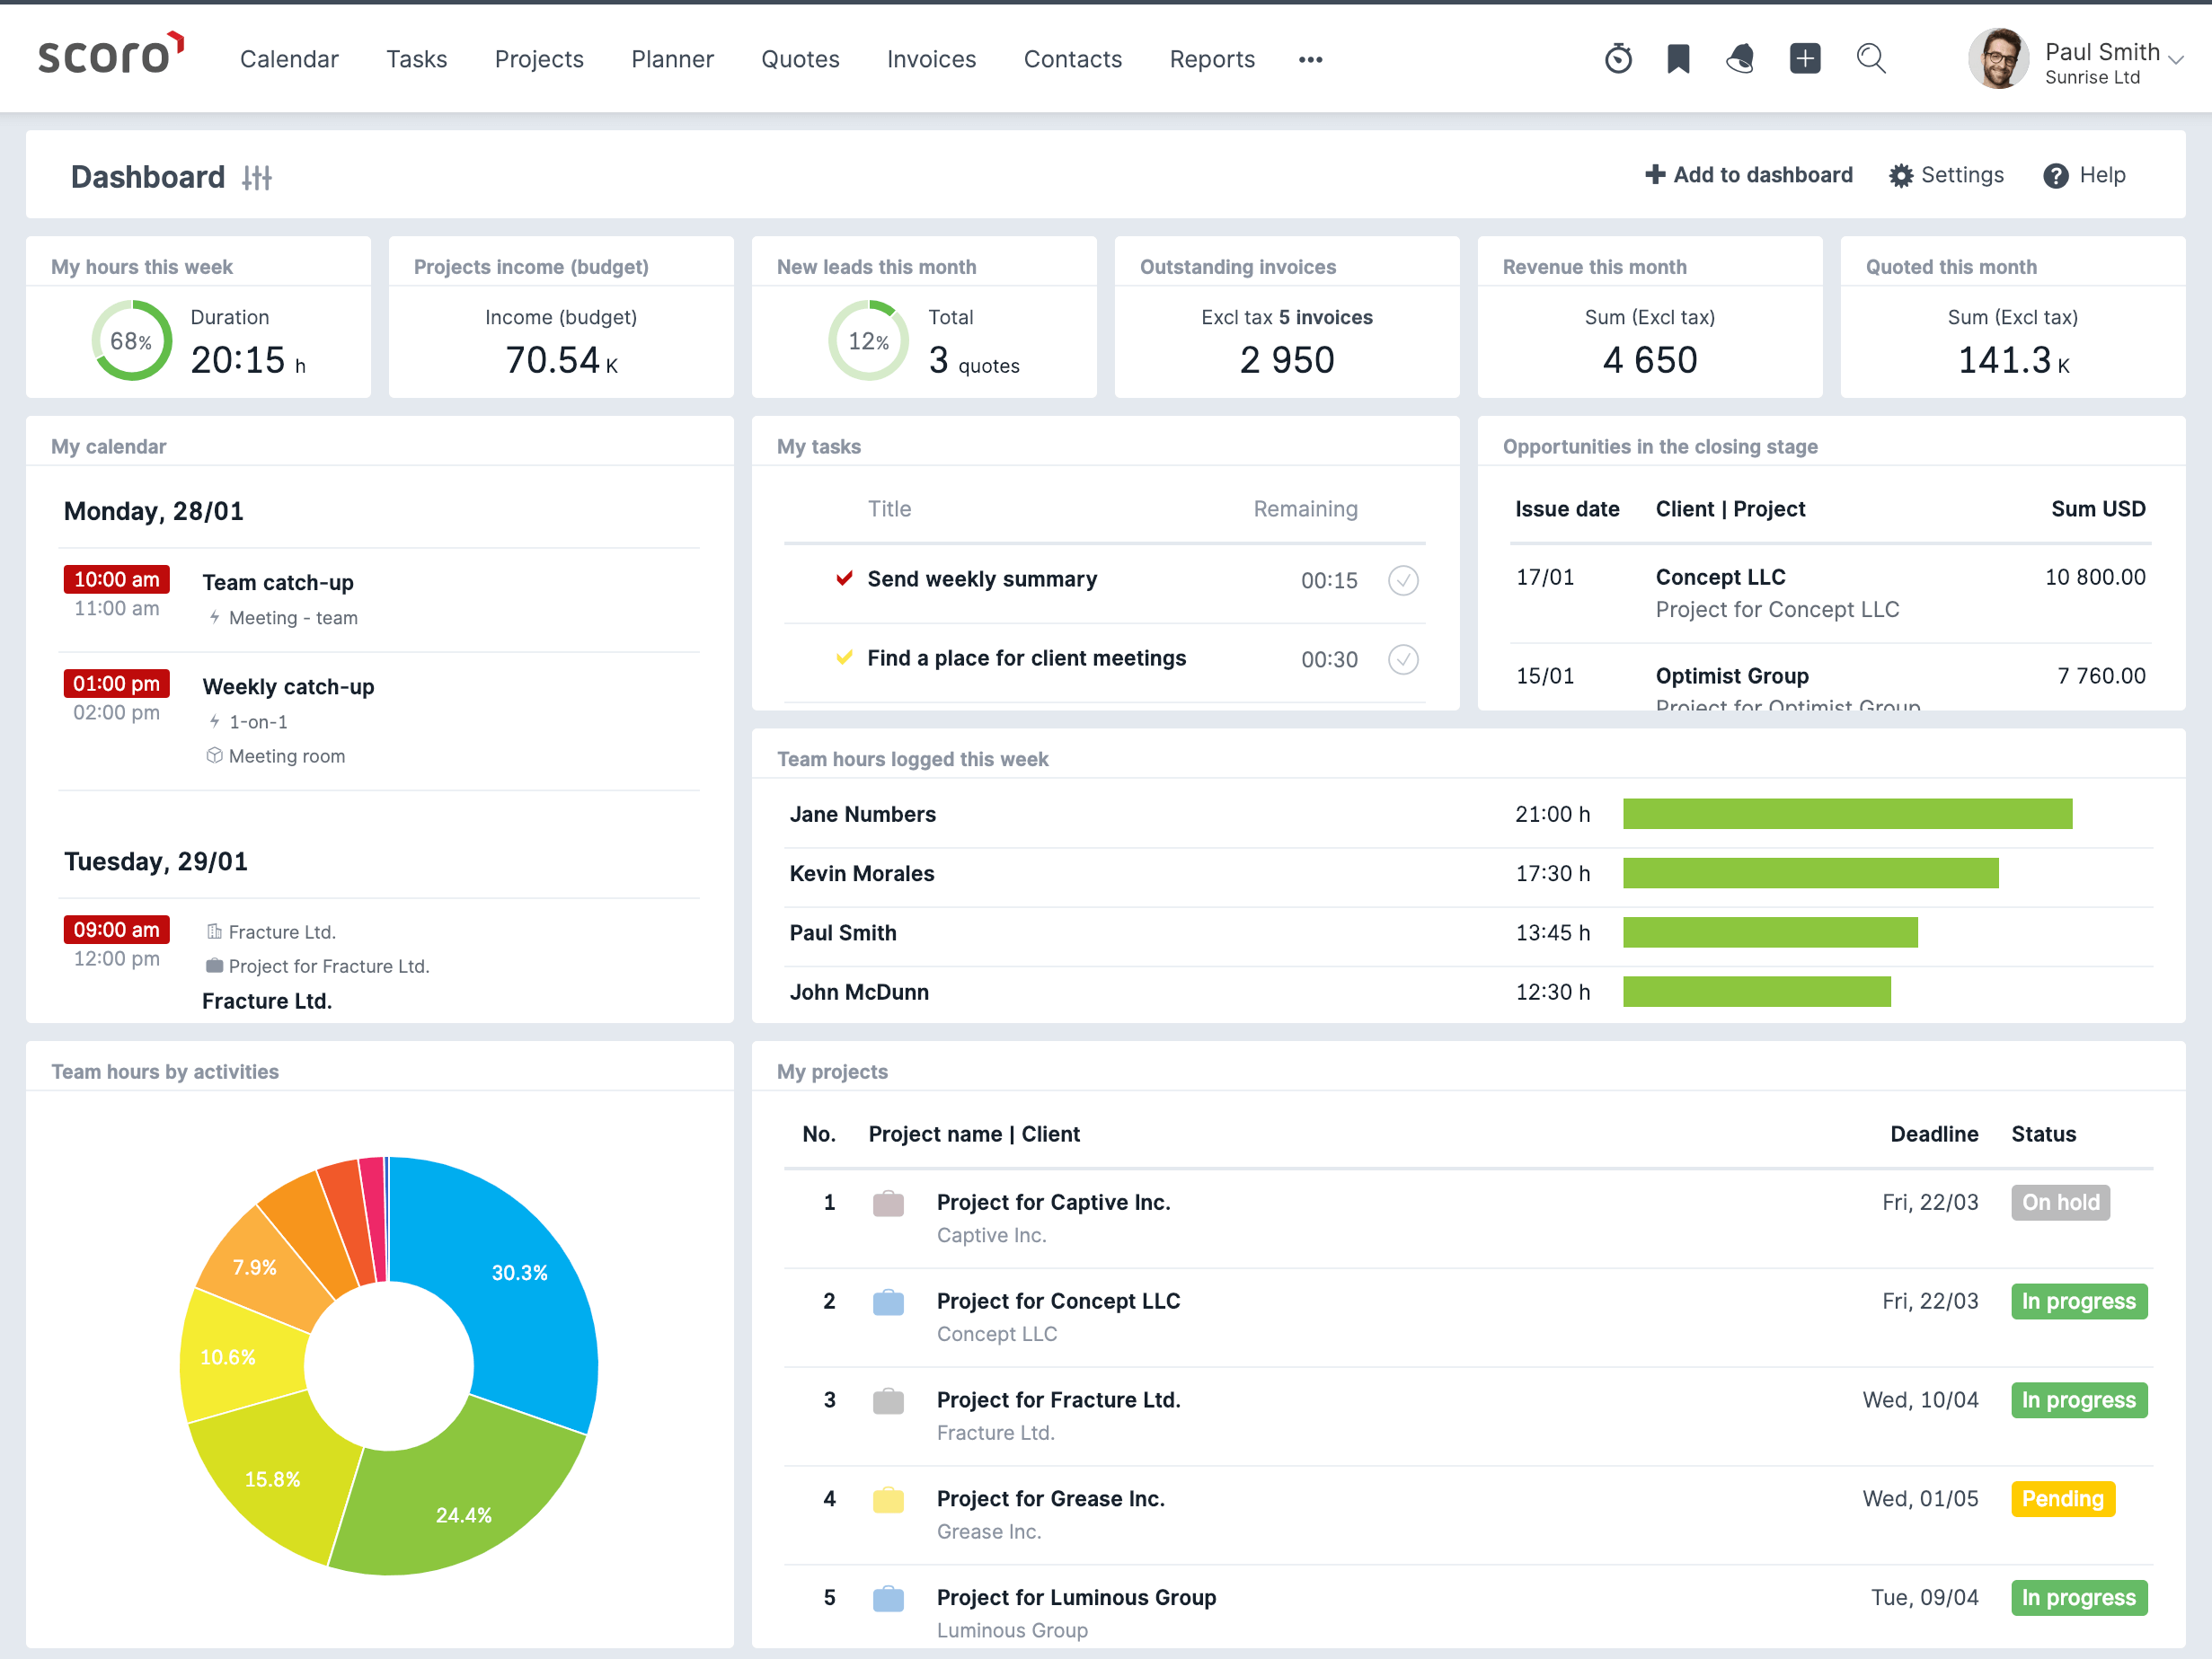 trial-dashboard-2019.png